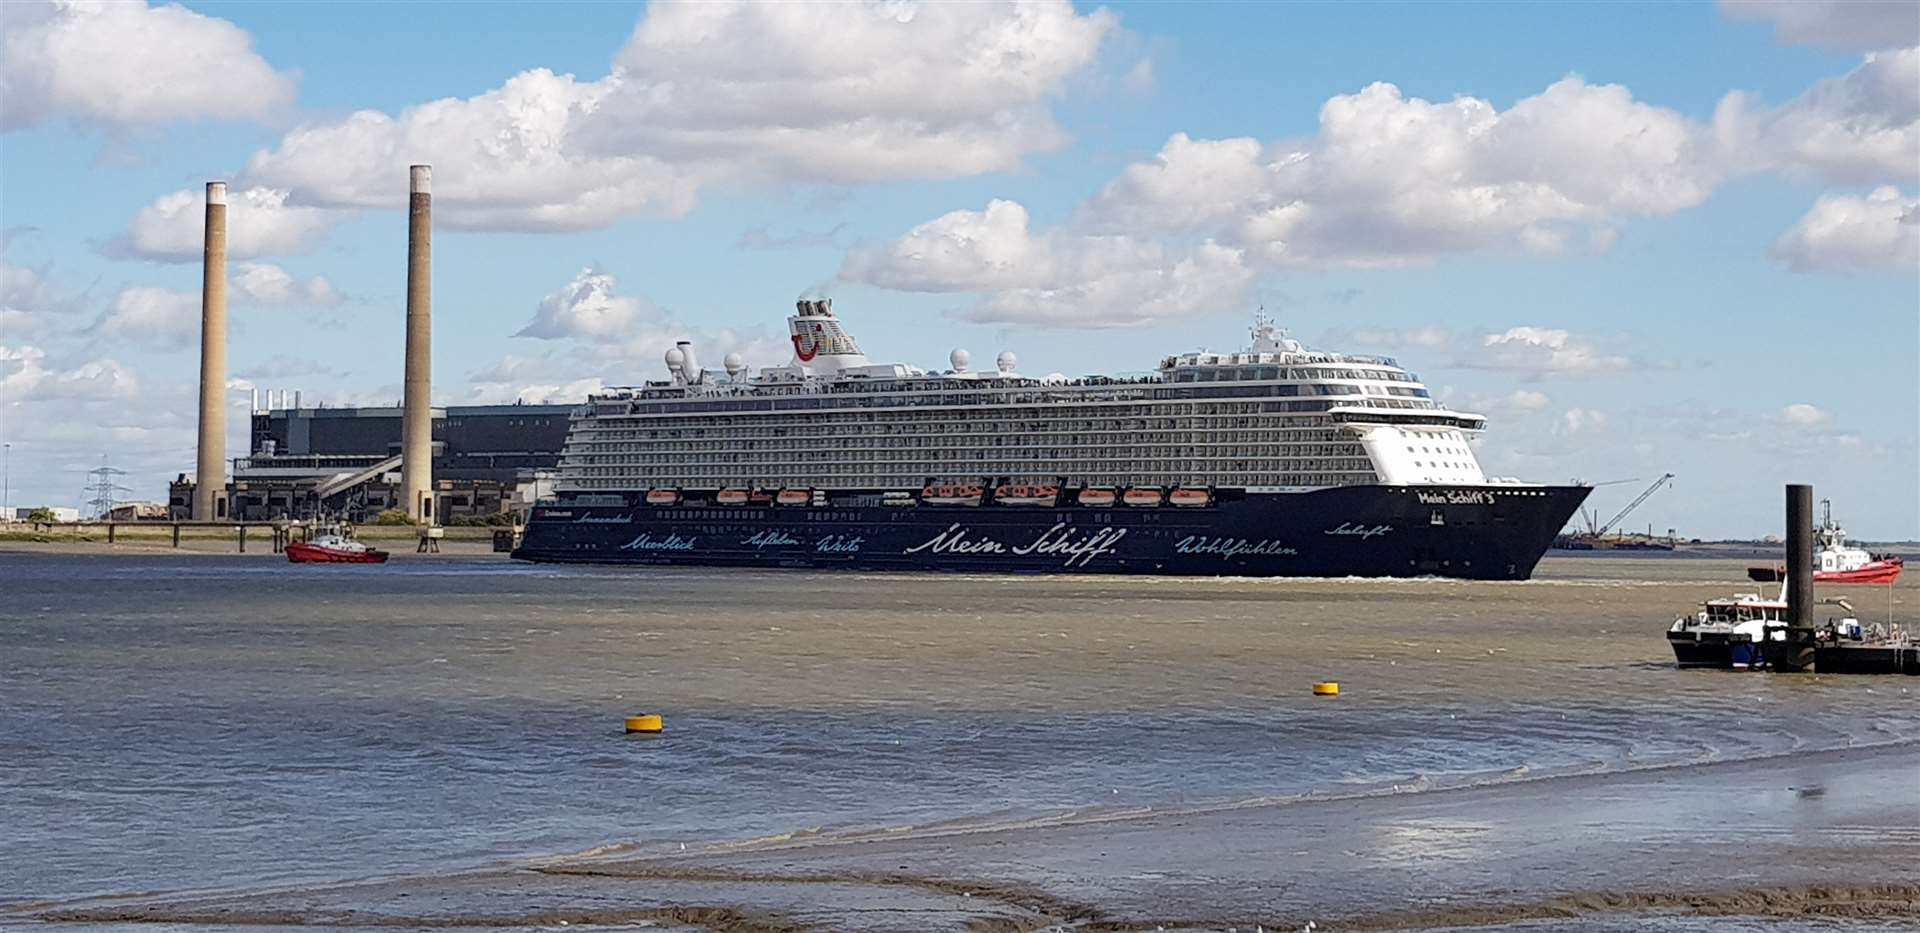 Cruise ship TUI Mein Schiff 3 prepares to head out to sea after being delayed by high winds.